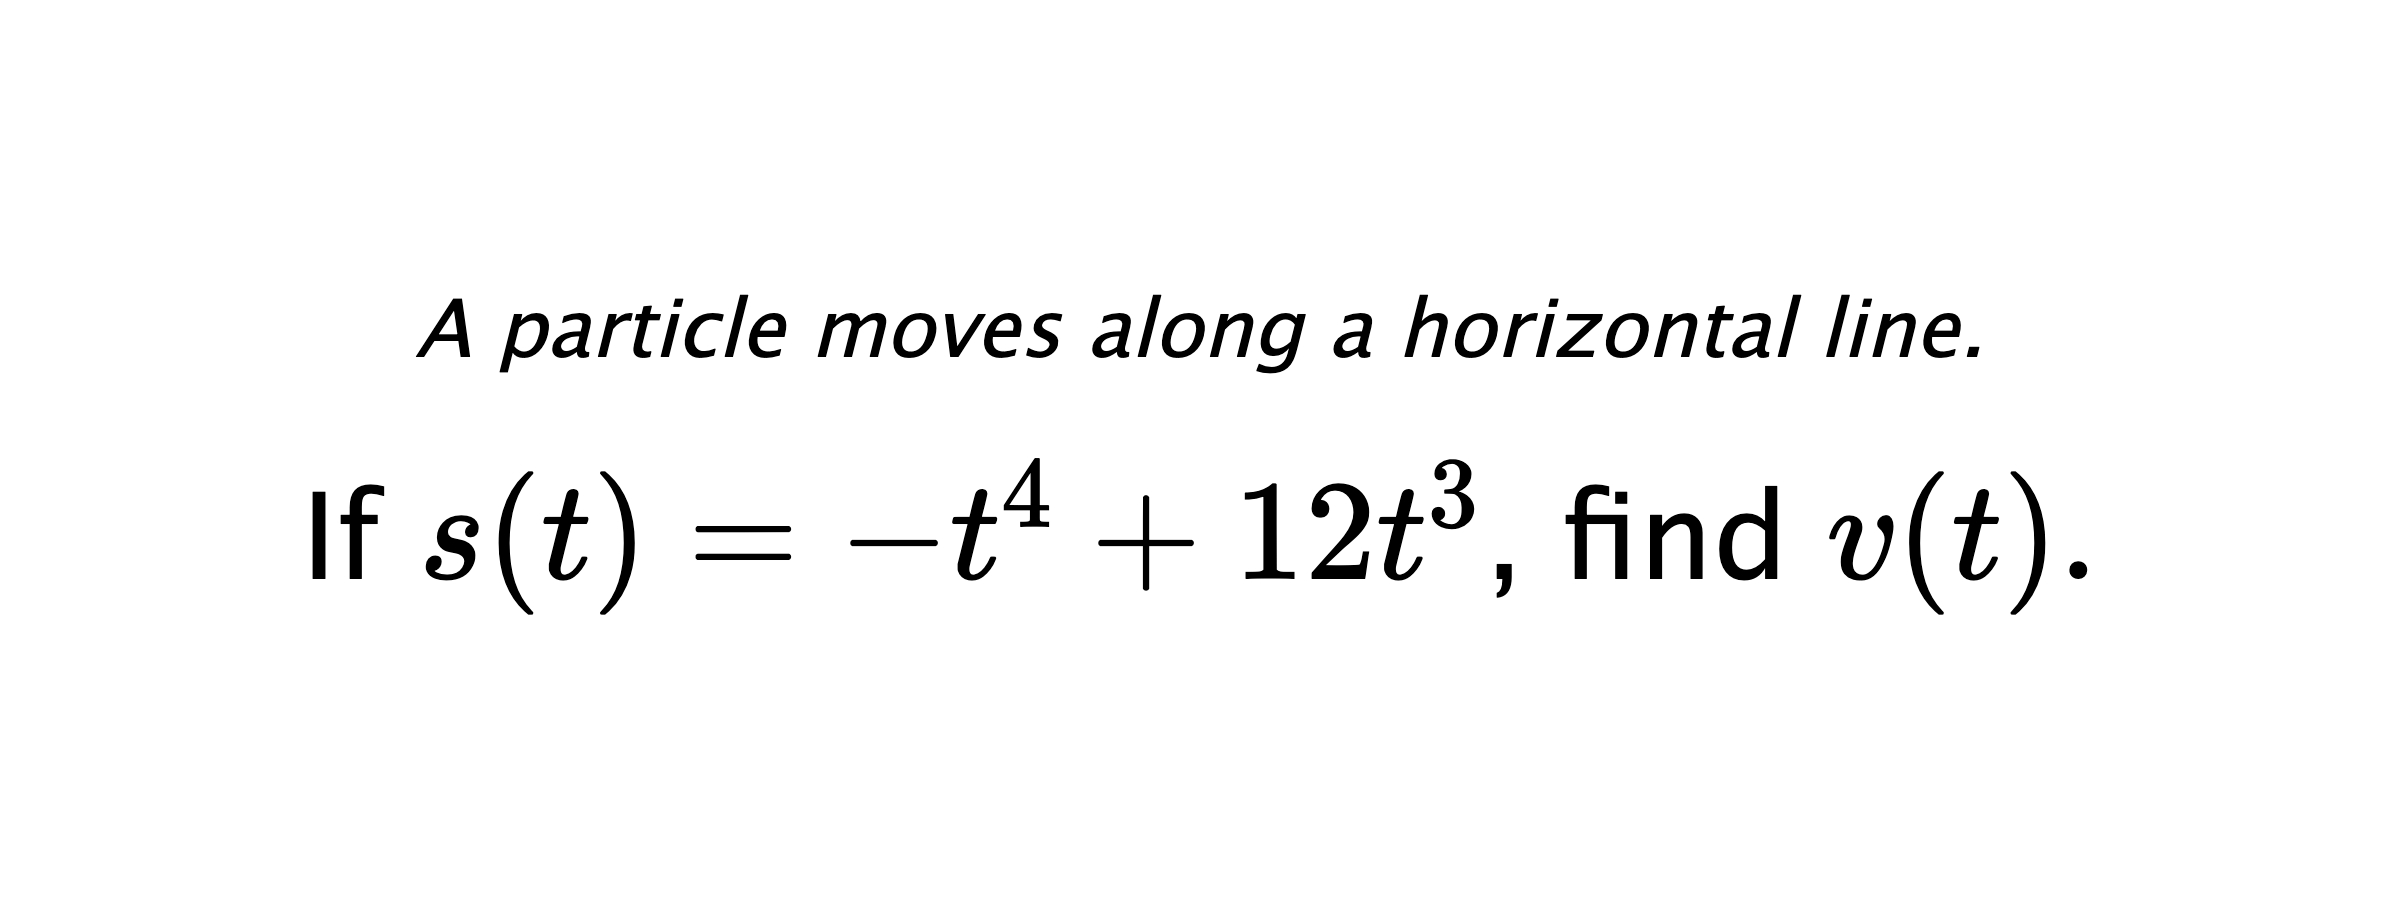 A particle moves along a horizontal line. If $ s(t)=-t^4+12t^3 $, find $ v(t). $